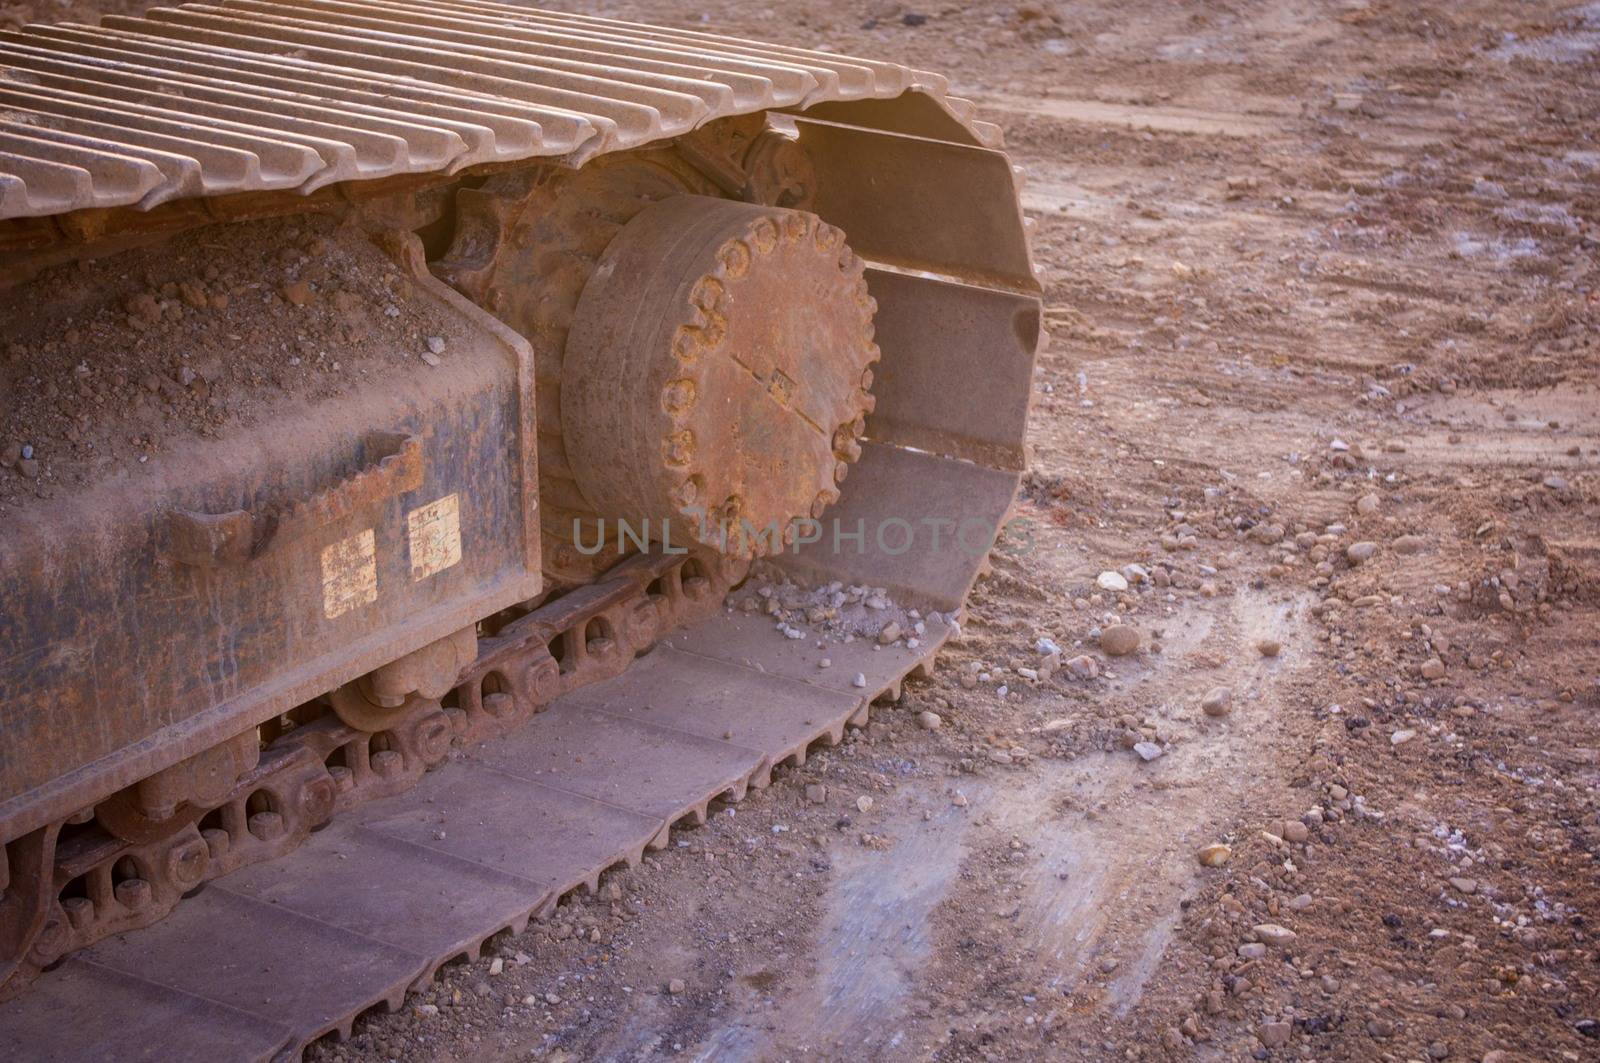 Bulldozer Close Up by krisblackphotography